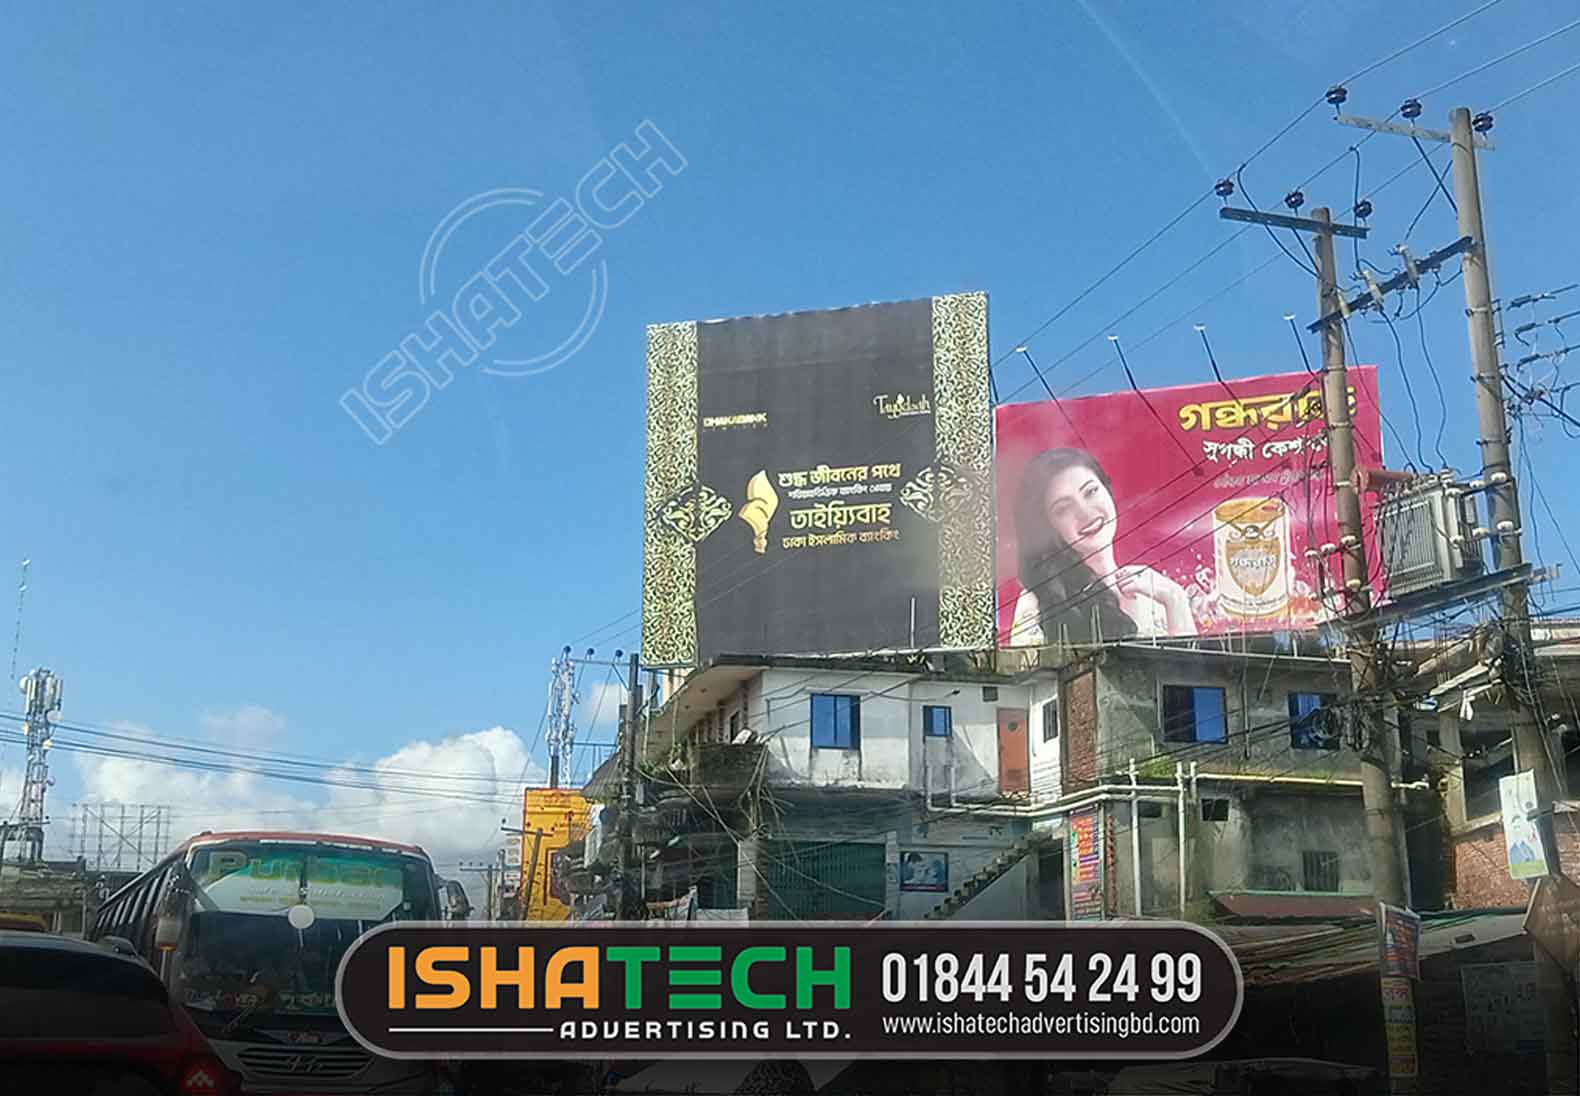 Printing Process and Installation Service: After the design has been finalised, the billboard is printed and set up in the desired area.